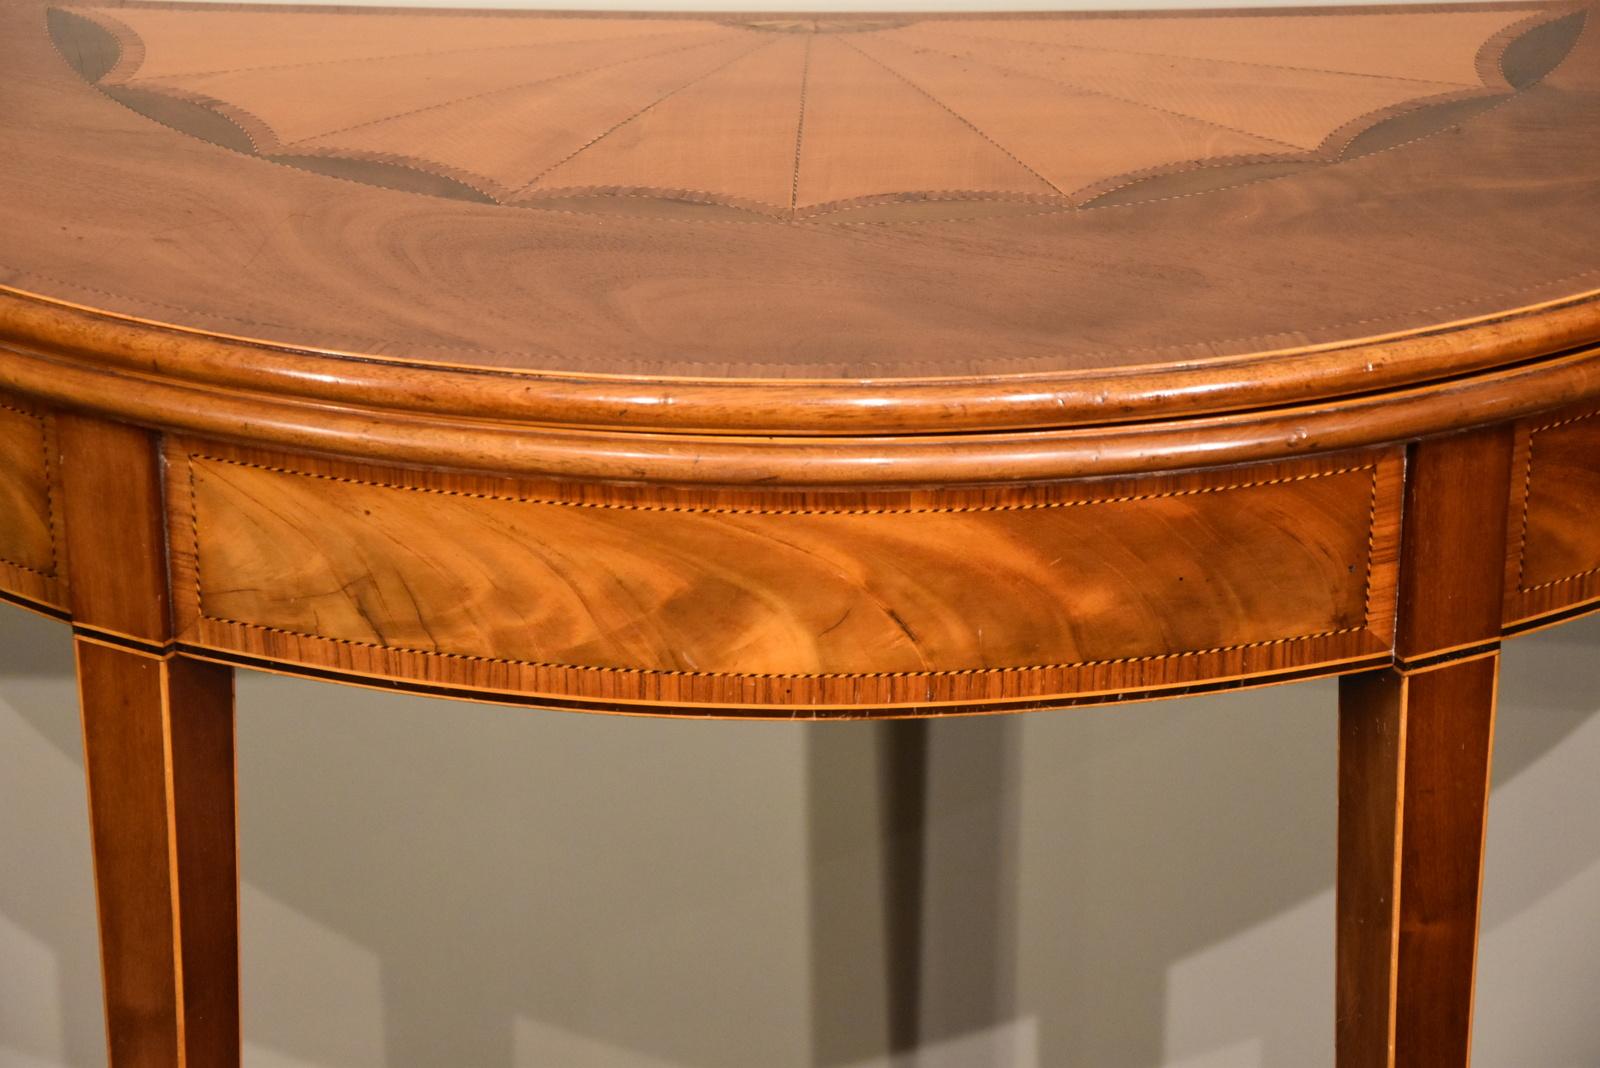 A superb George III mahogany inlaid demilune card table

Measures: Height 29.5